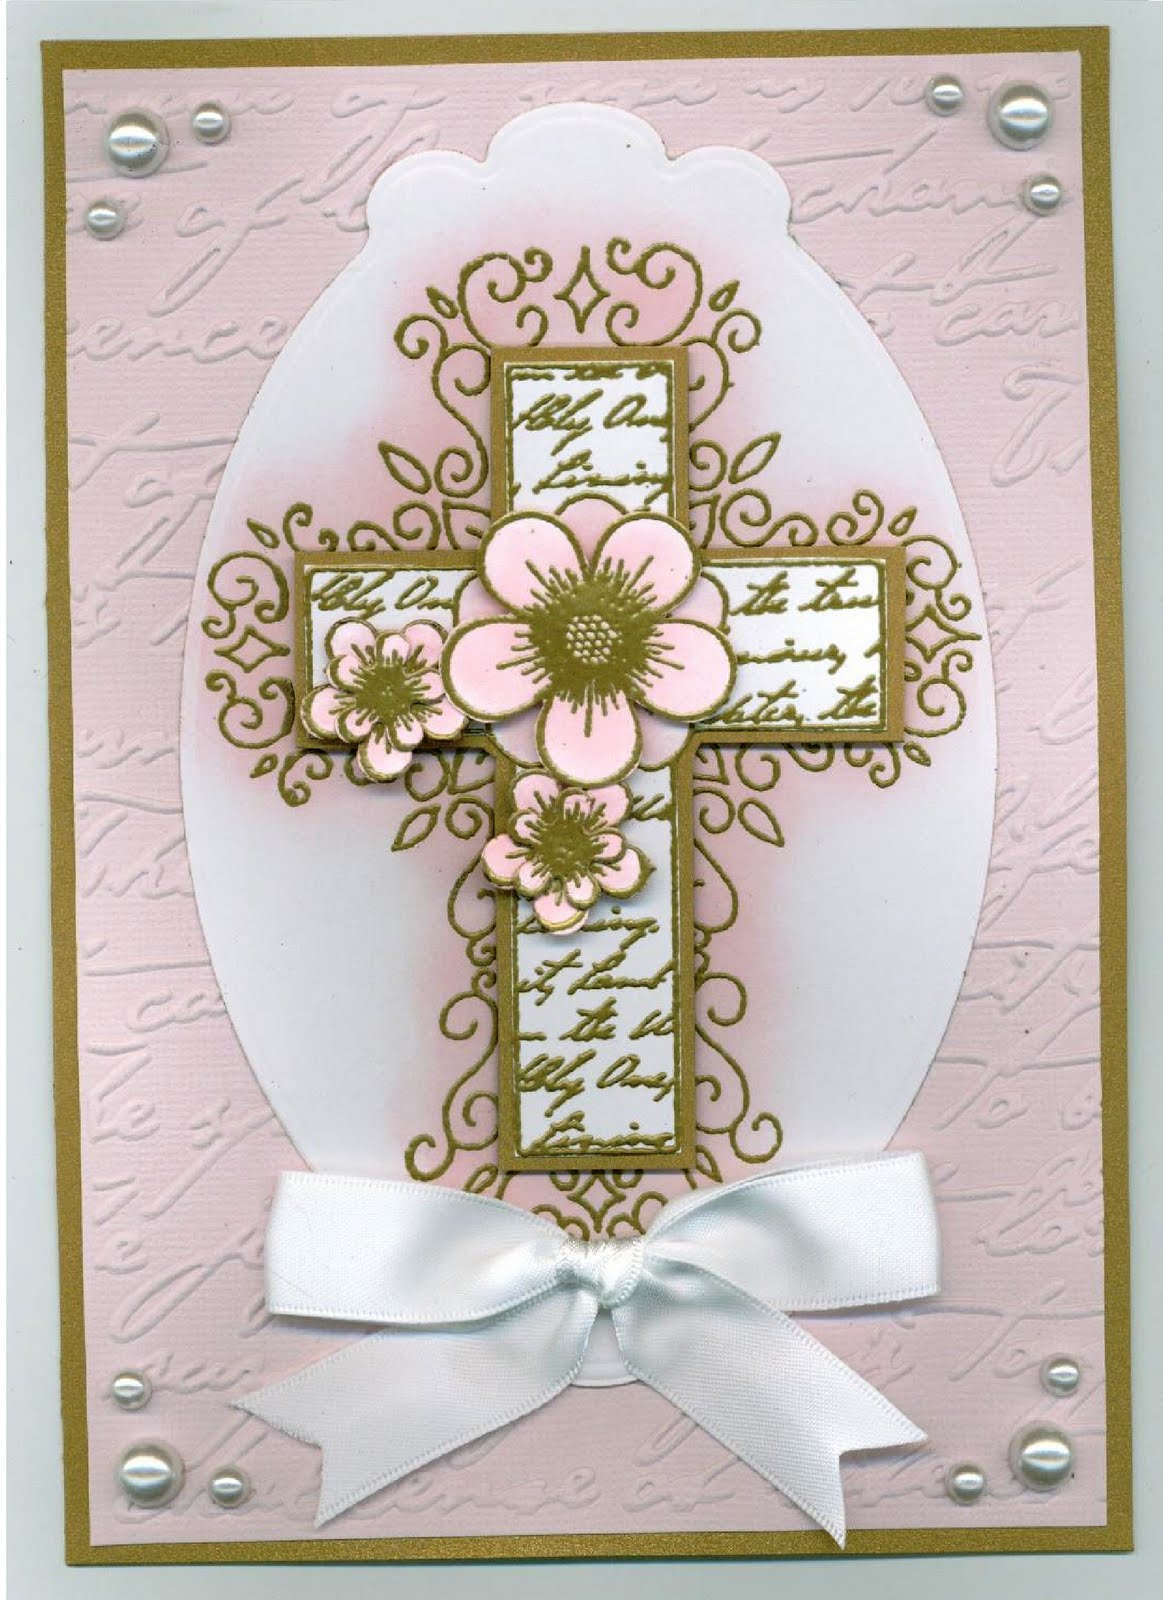 First Communion Cards Near Me